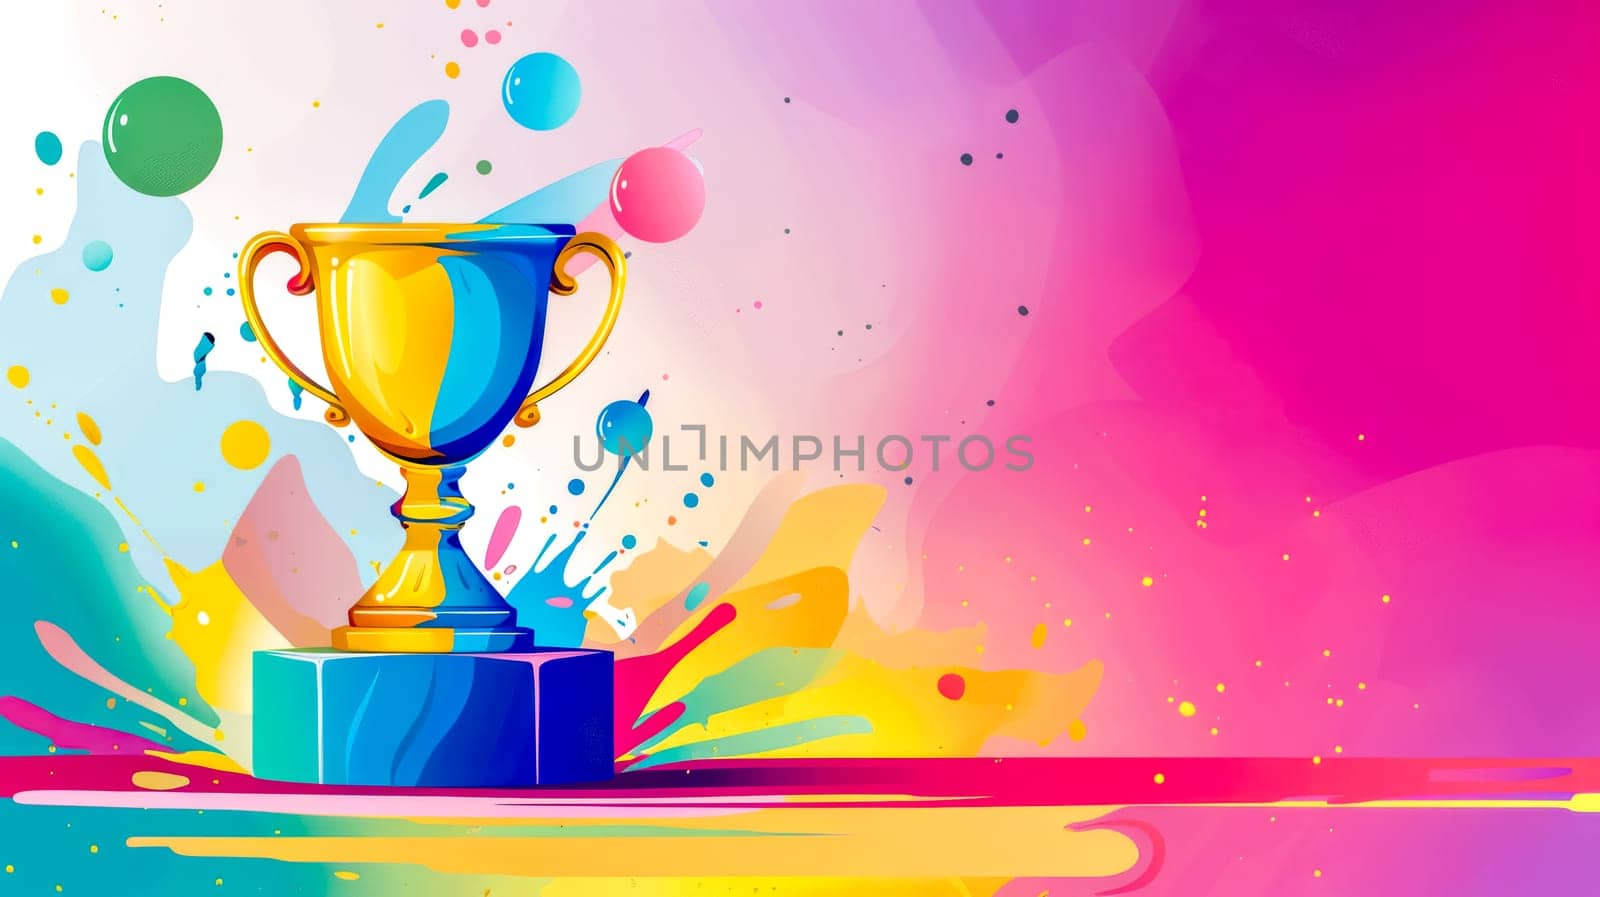 Colorful and vibrant abstract trophy celebration background with paint splashes and golden accents for victory, success, and achievement illustration